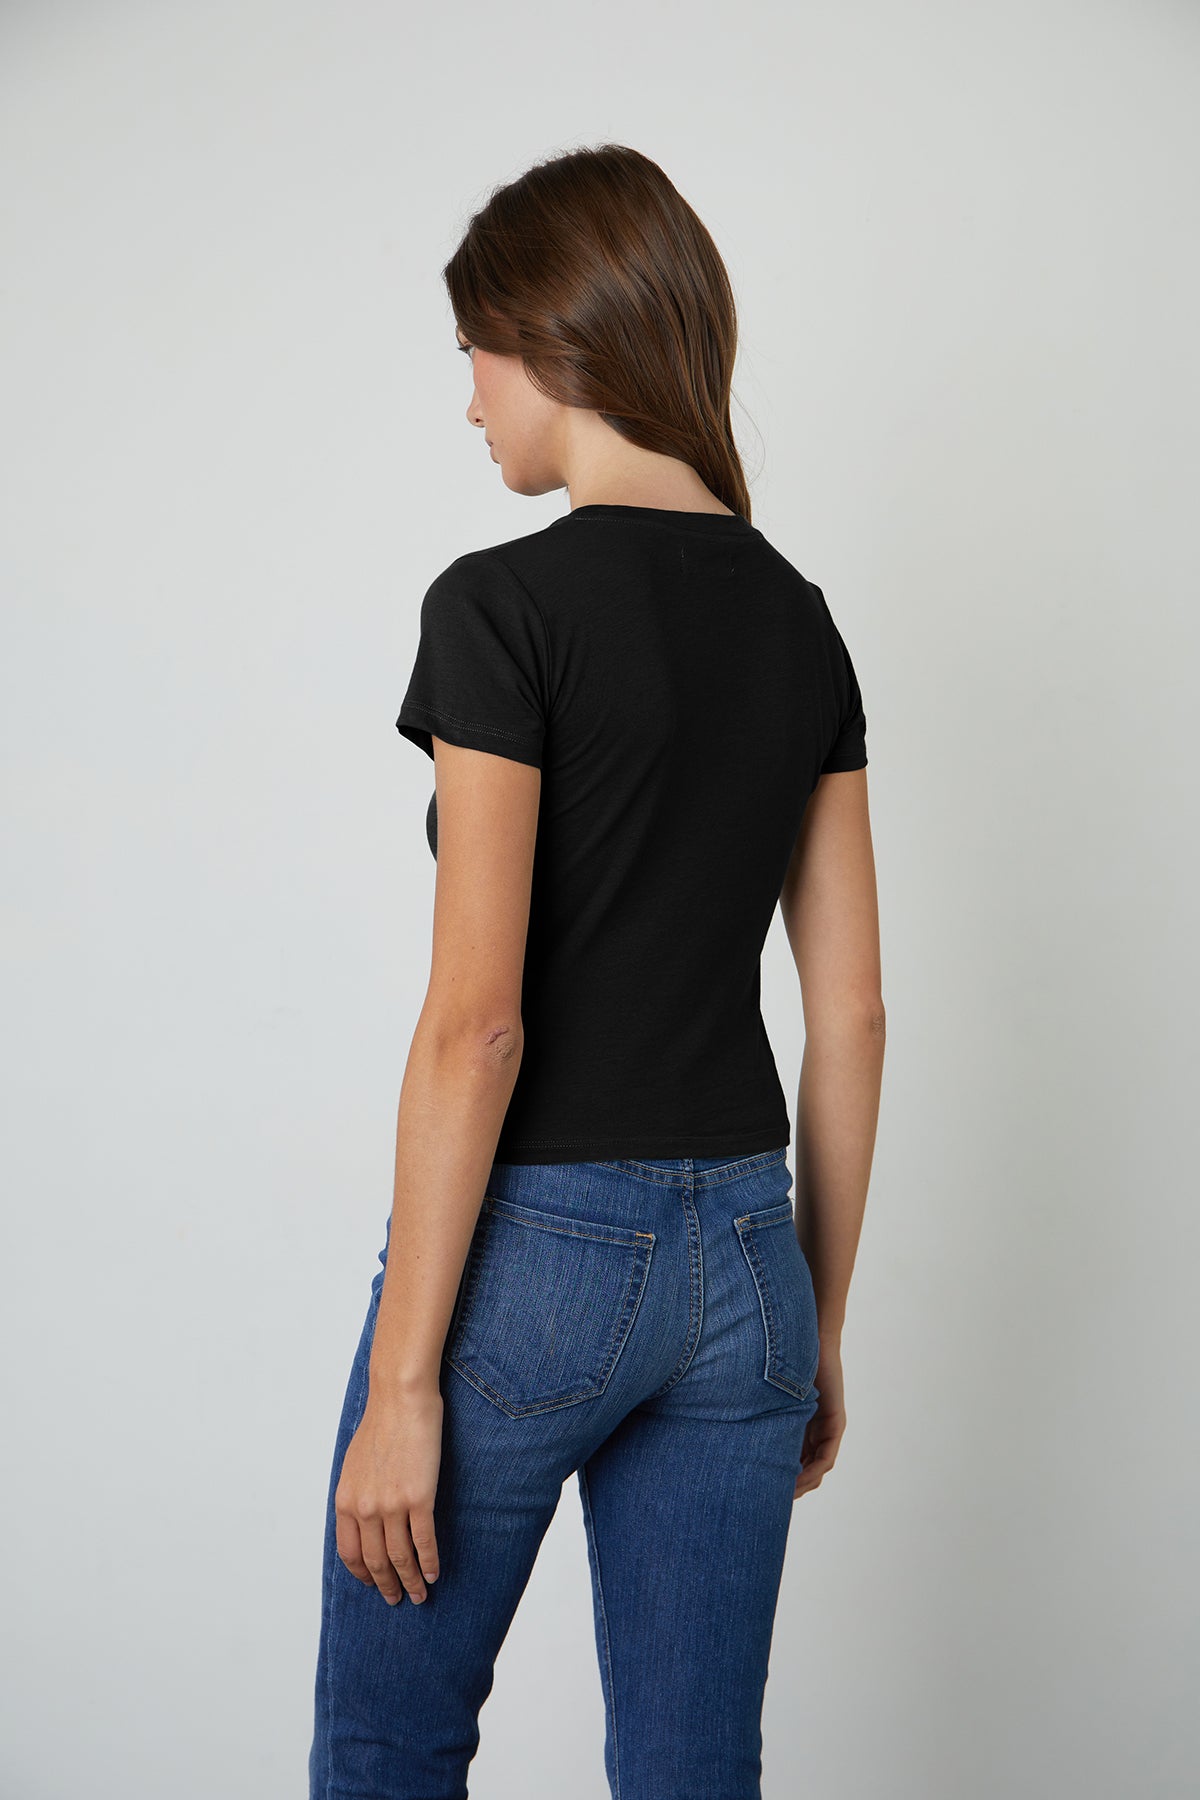   The woman is seen from behind, sporting jeans and a black t-shirt made of whisper cotton knit fabric, perfect for warm-weather, specifically the NINA CROPPED CREW NECK TEE from Velvet by Graham & Spencer. 